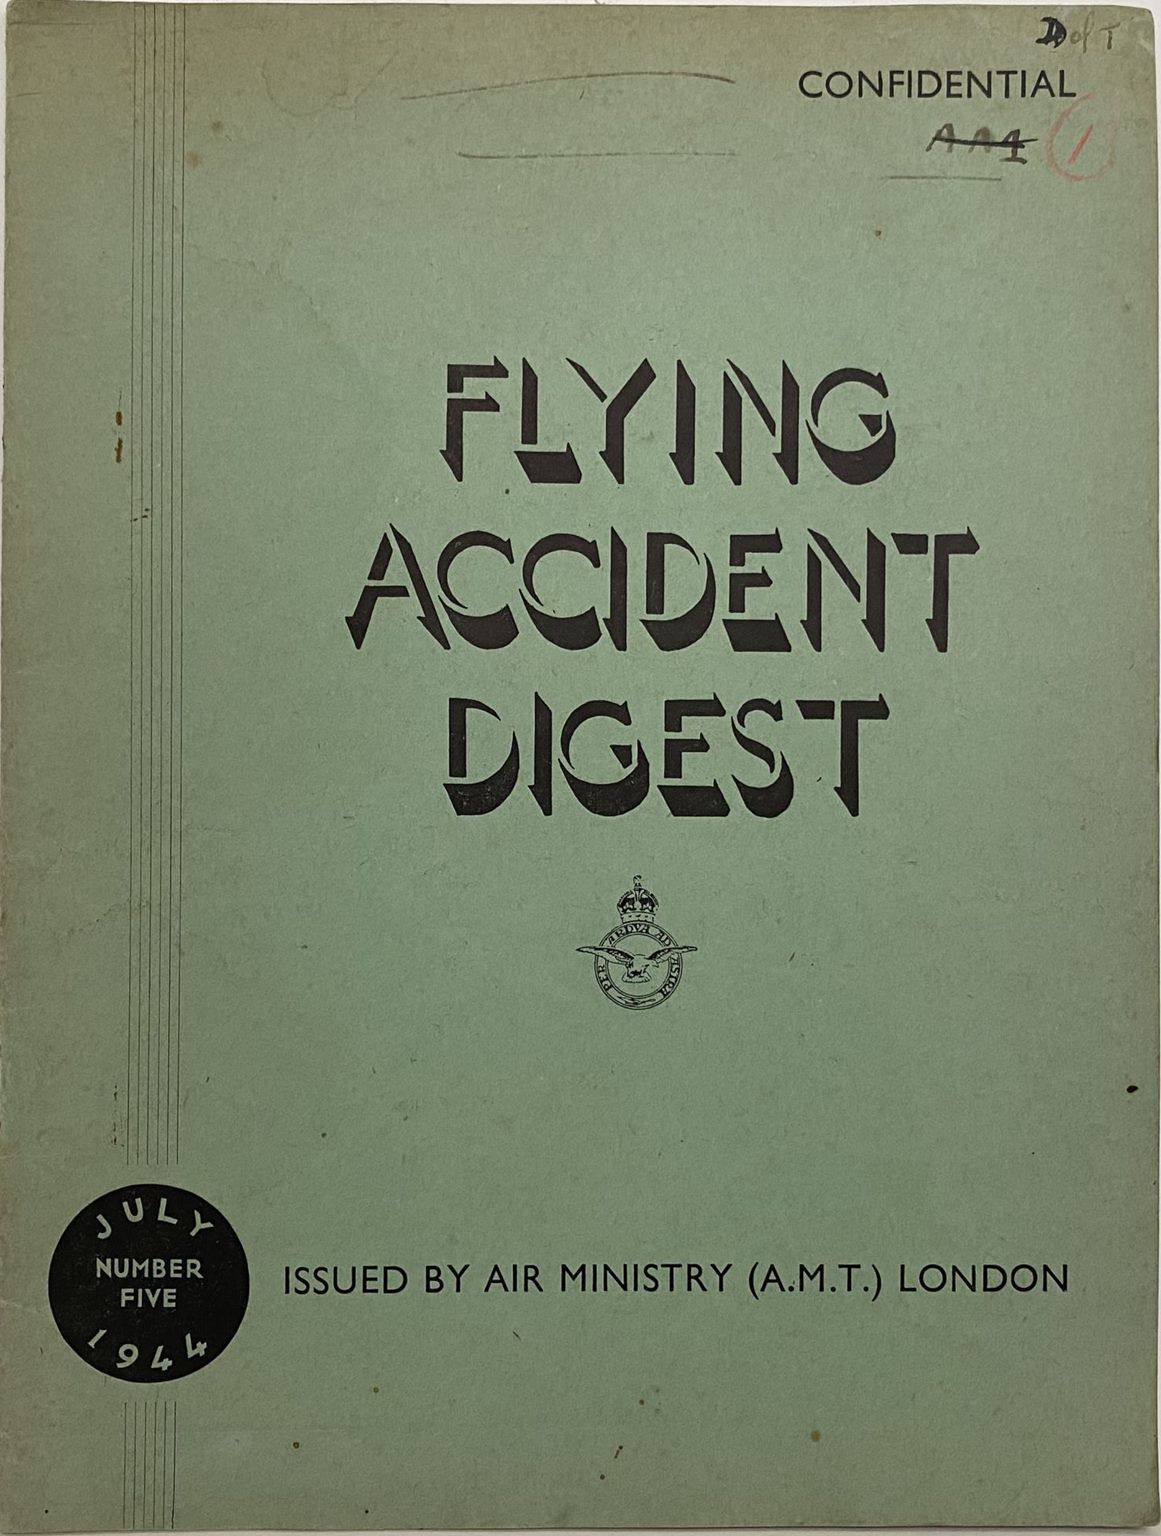 FLYING ACCIDENT DIGEST Number 5